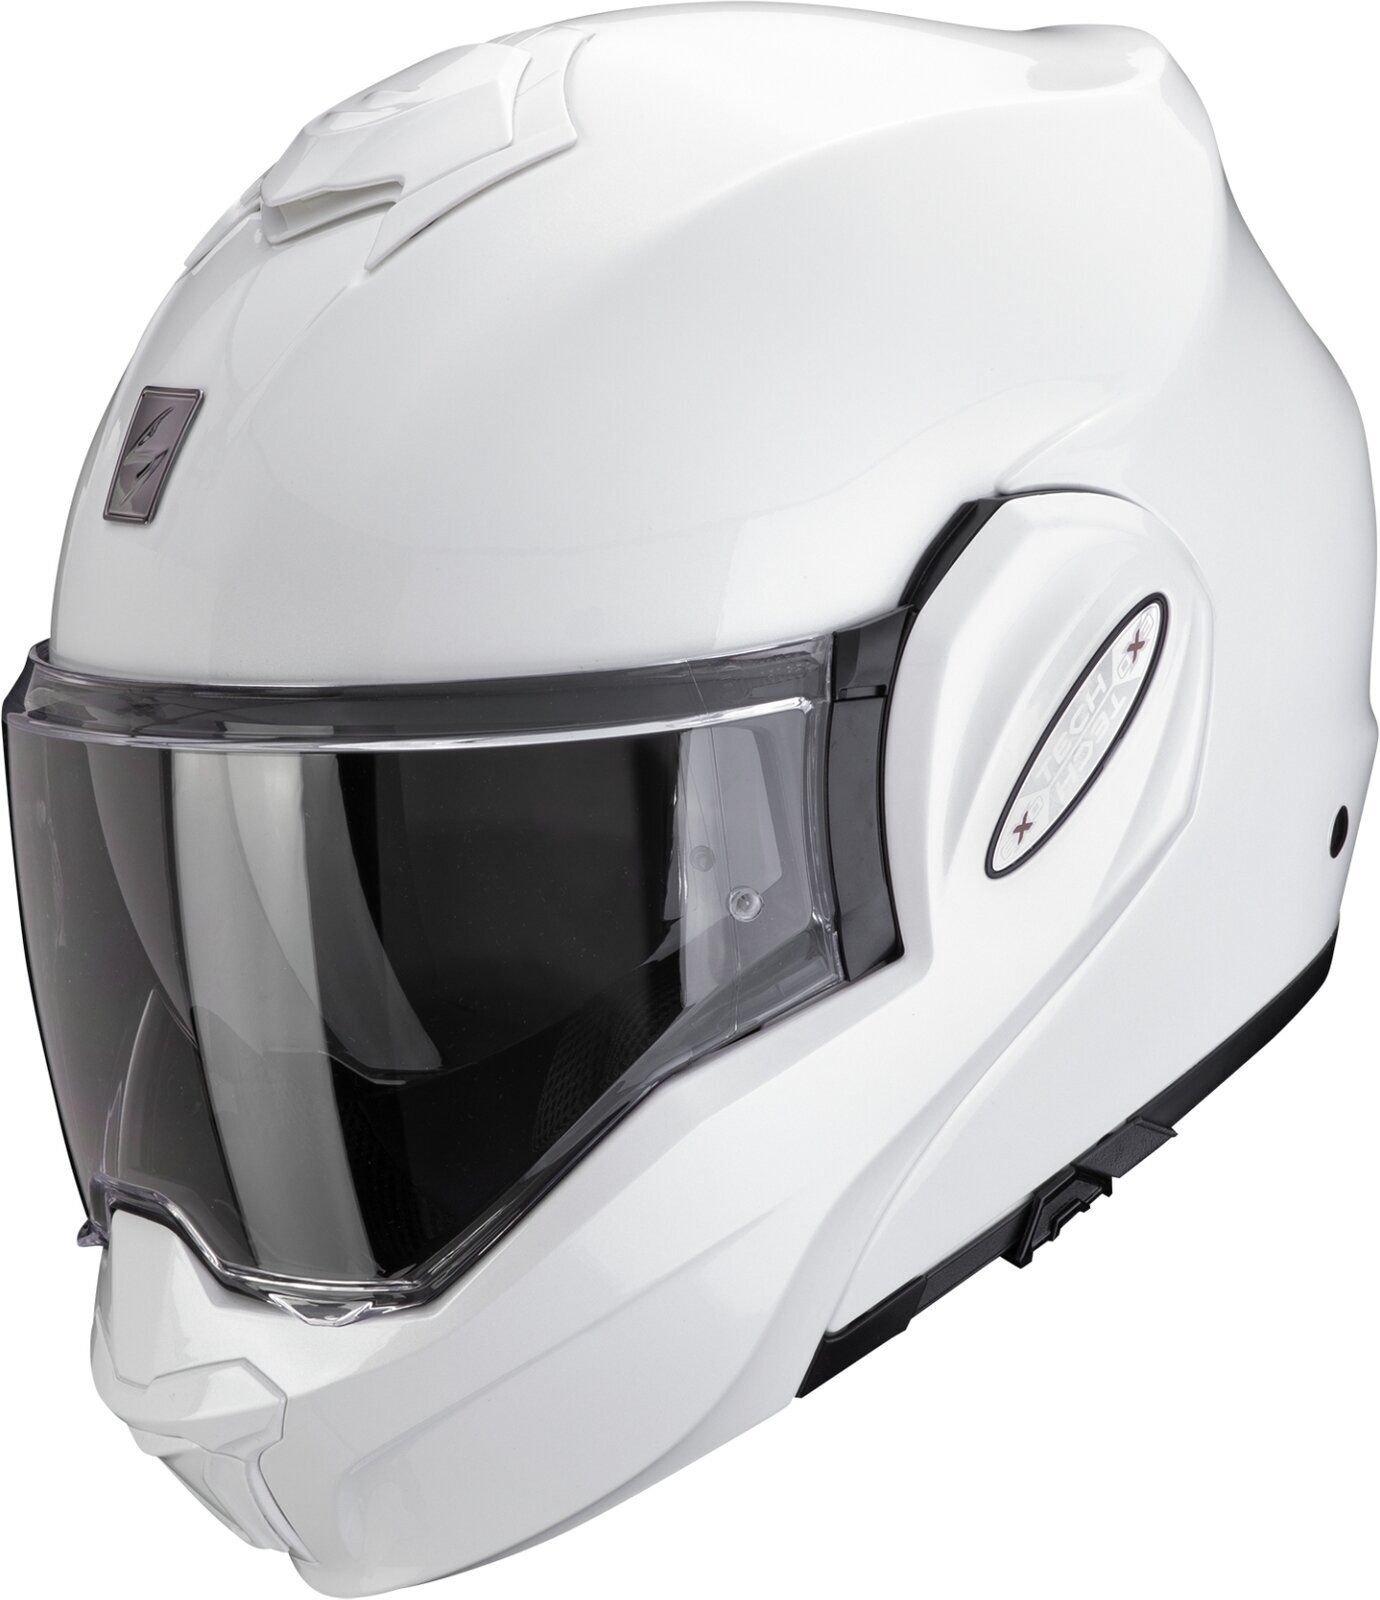 Helm Scorpion EXO-TECH EVO PRO SOLID Pearl White S Helm